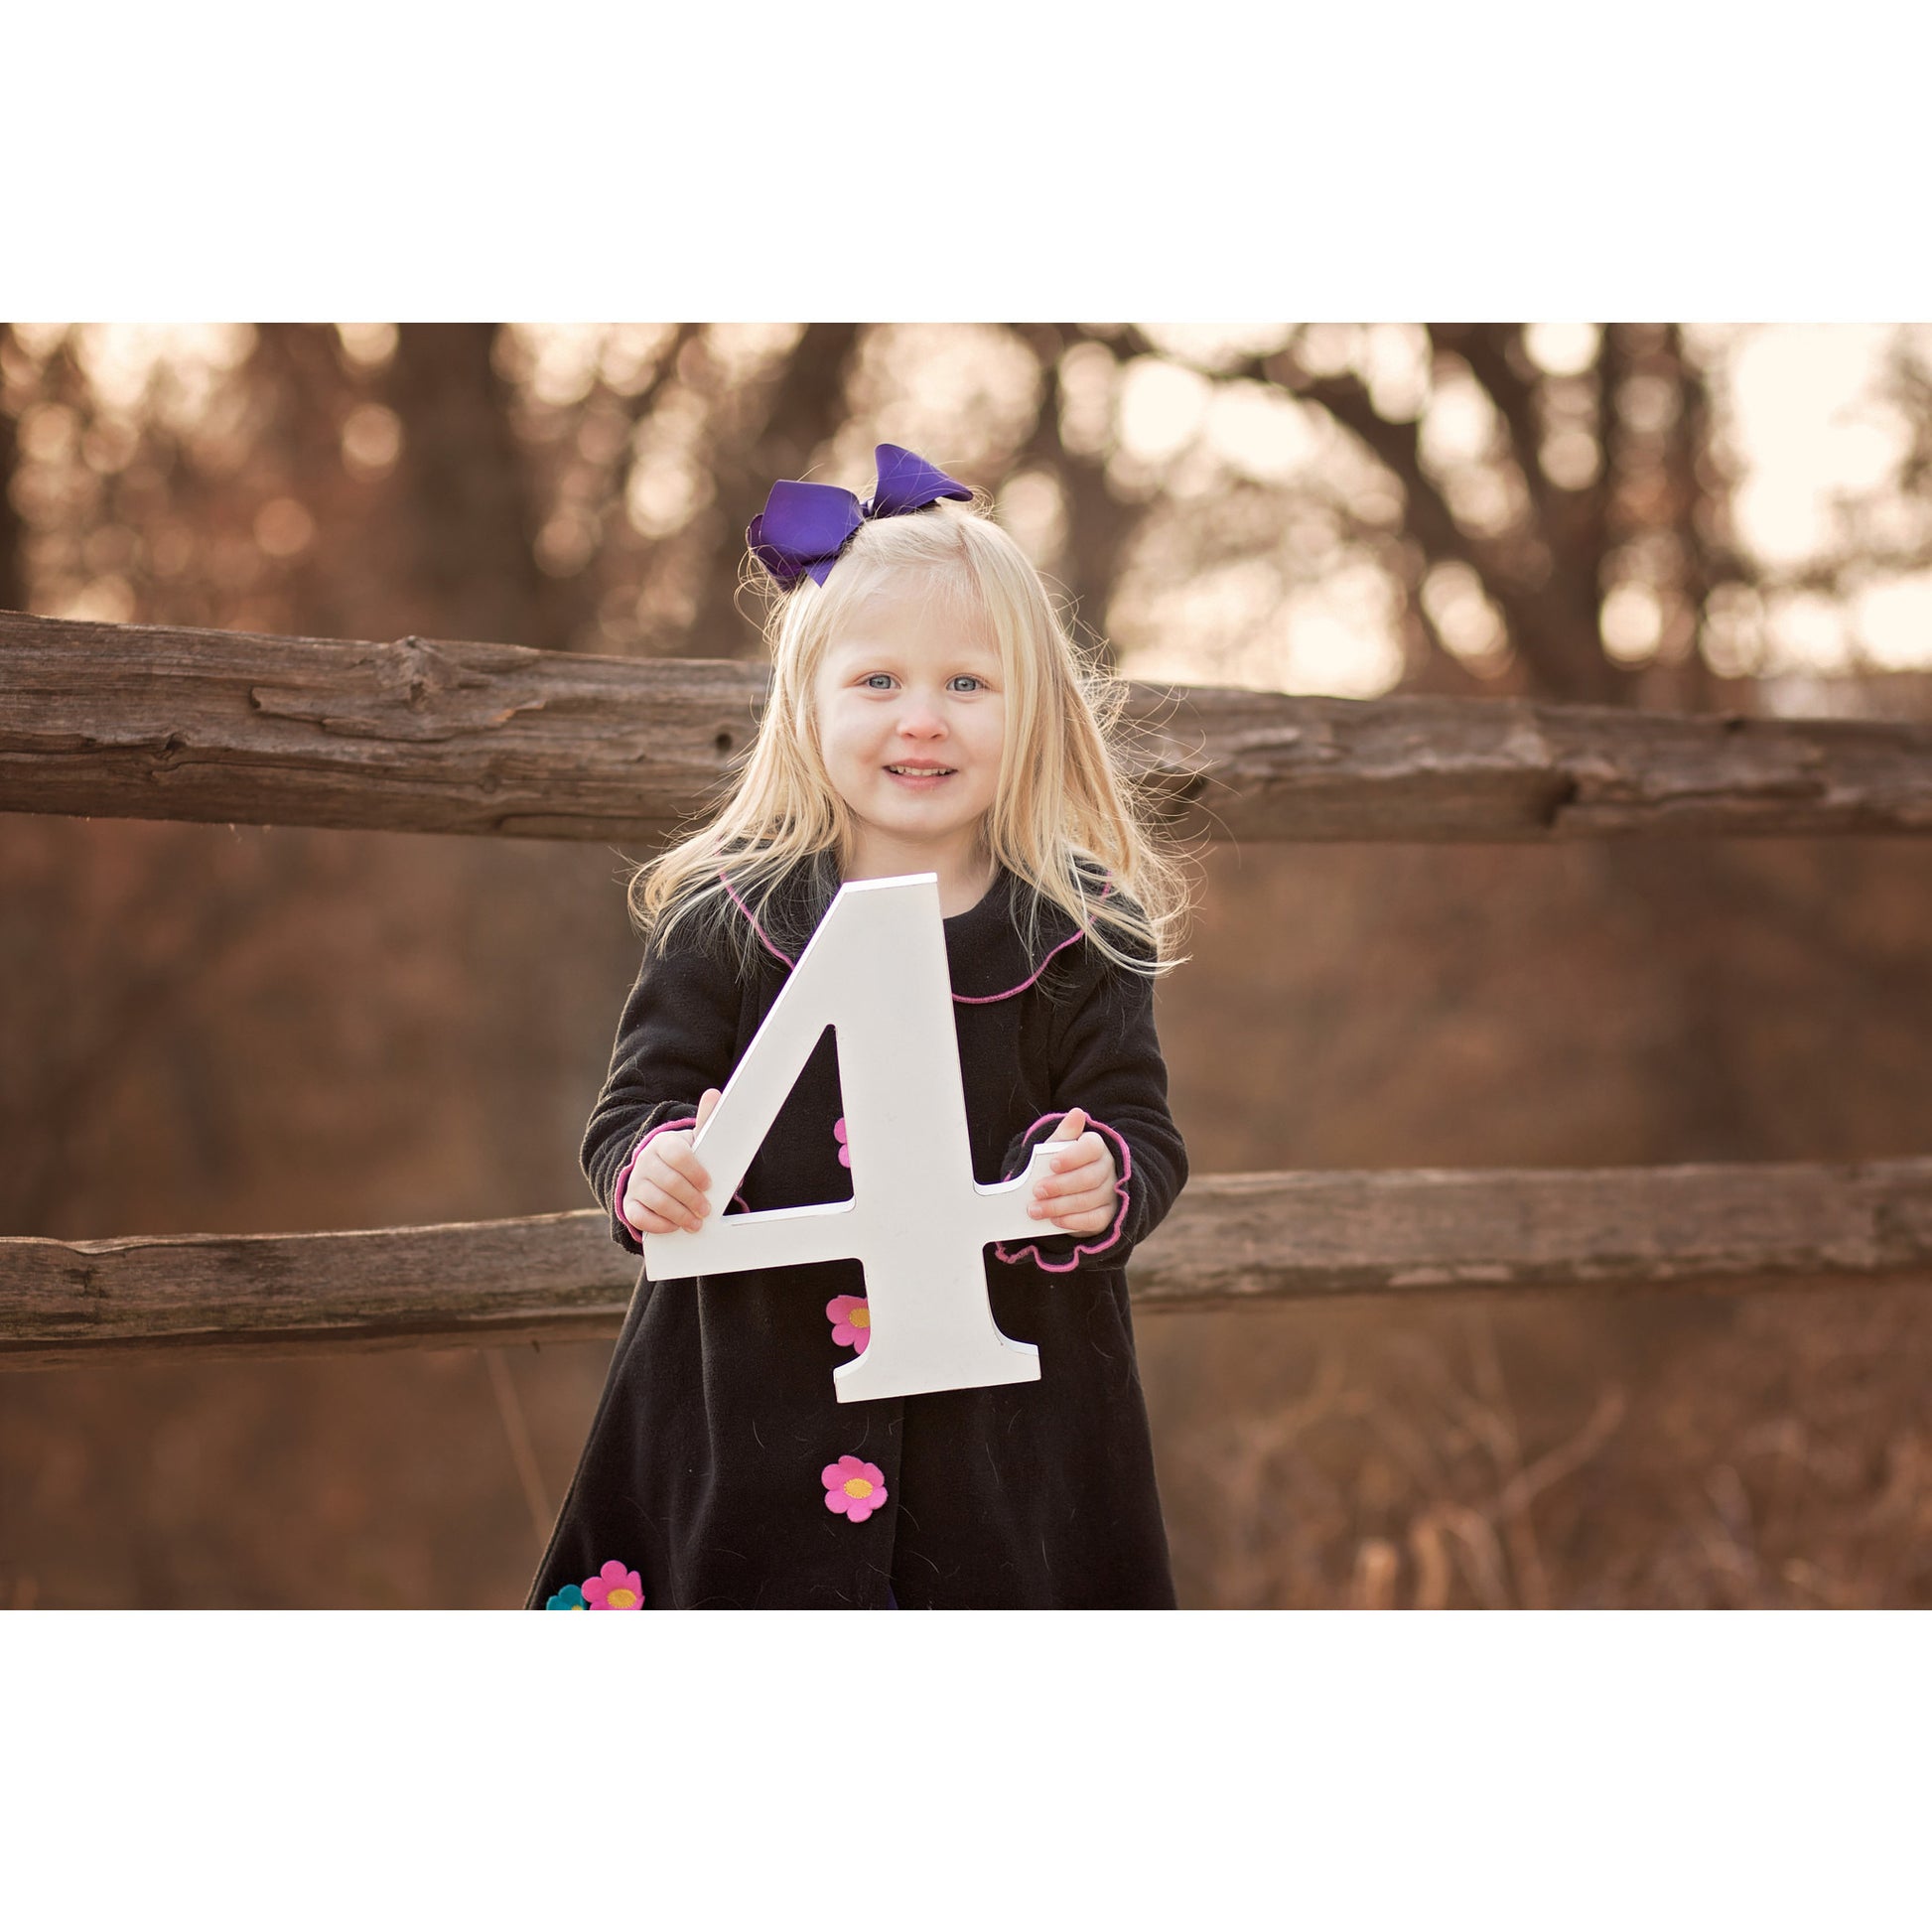 4 Sign Wooden Number Children's Photo Prop Four - Wedding Decor Gifts